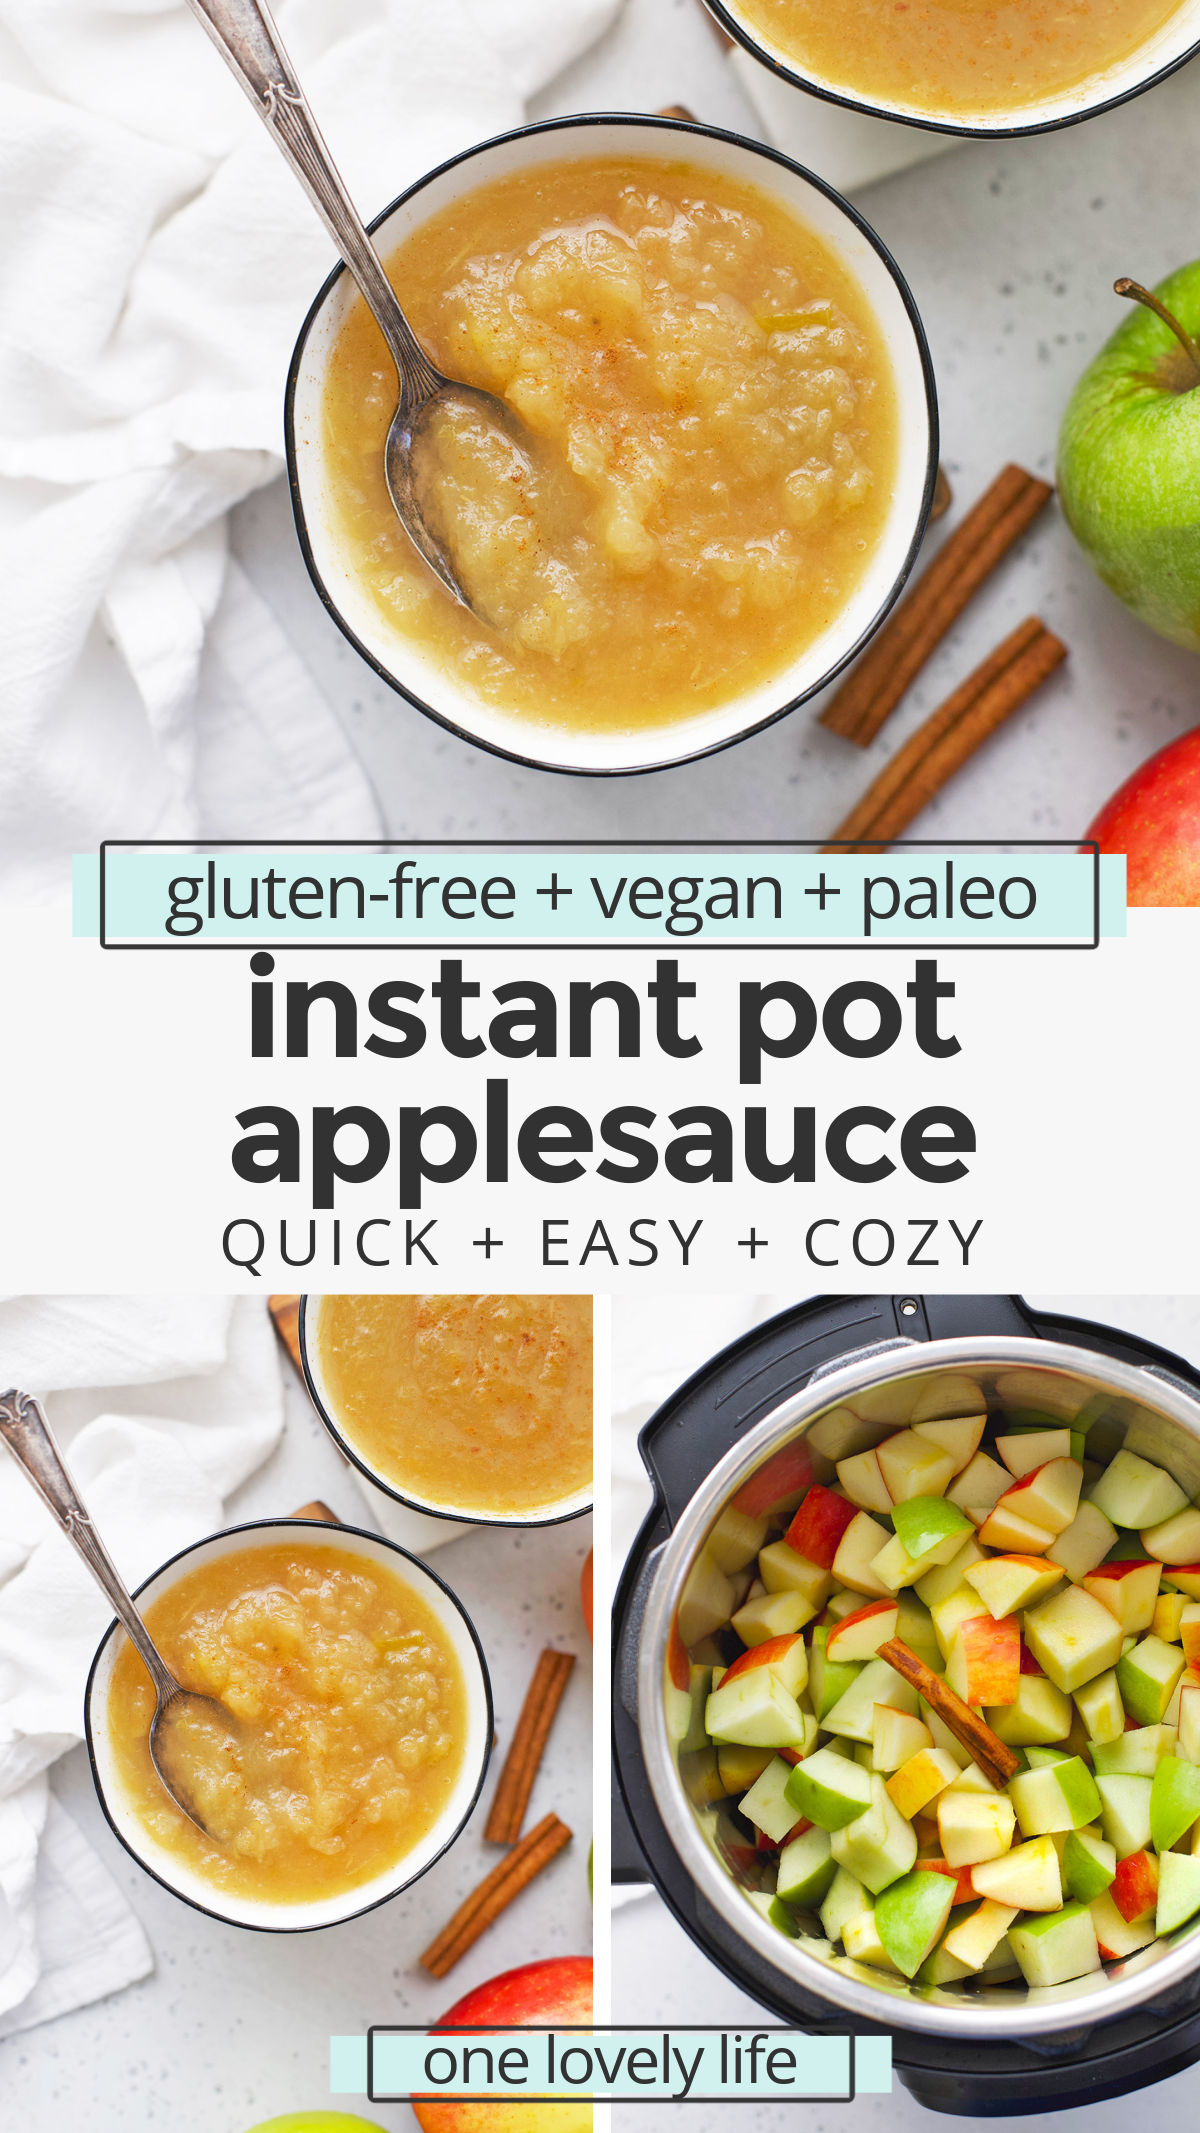 Instant Pot Applesauce - Homemade applesauce made in the pressure cooker! This recipe is easy, delicious, and great for beginners! (Paleo, Vegan) // Instant Pot Applesauce Recipe // No Sugar Added Applesauce // Unsweetened Instant Pot Applesauce #applesauce #instantpot #pressurecooker #sidedish #applerecipes #paleo #vegan